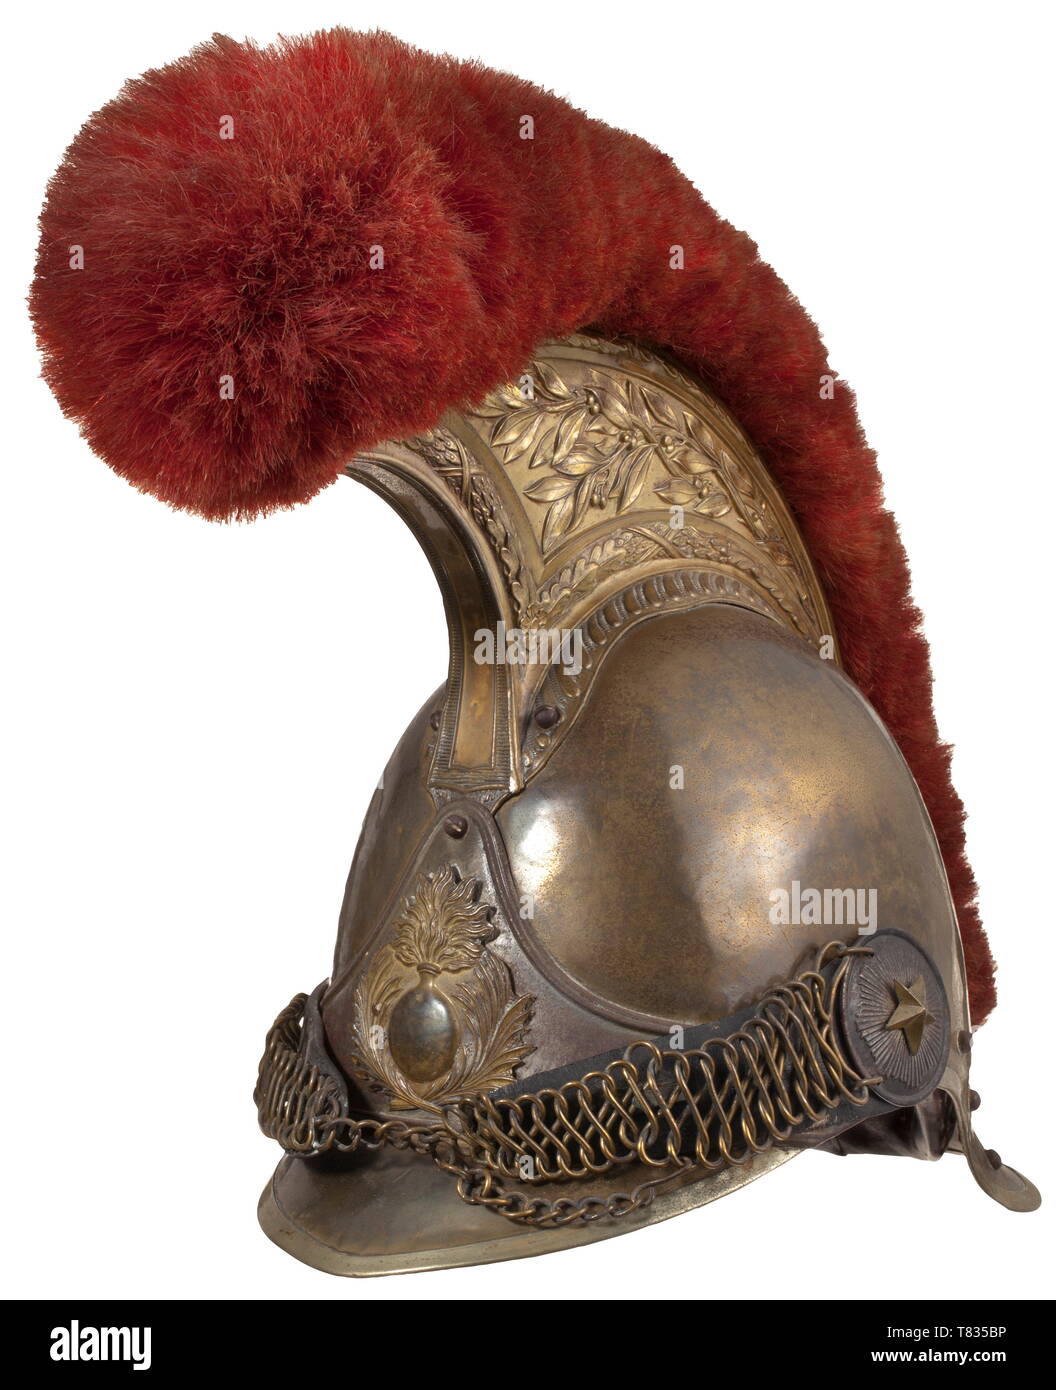 A helmet M 1856 for enlisted men of the Carabiniers Helmet skull of brass. Gilt comb in relief with red horsehair crest and nickel silver edging, iron emblem with nickel silver coating and applied brass grenade. Leather-backed brass chin scales on rosettes with applied star. Brown front visor liner (damaged), replaced brown leather liner. Traces of usage and age. historic, historical, 19th century, Europe, 19th century, Additional-Rights-Clearance-Info-Not-Available Stock Photo